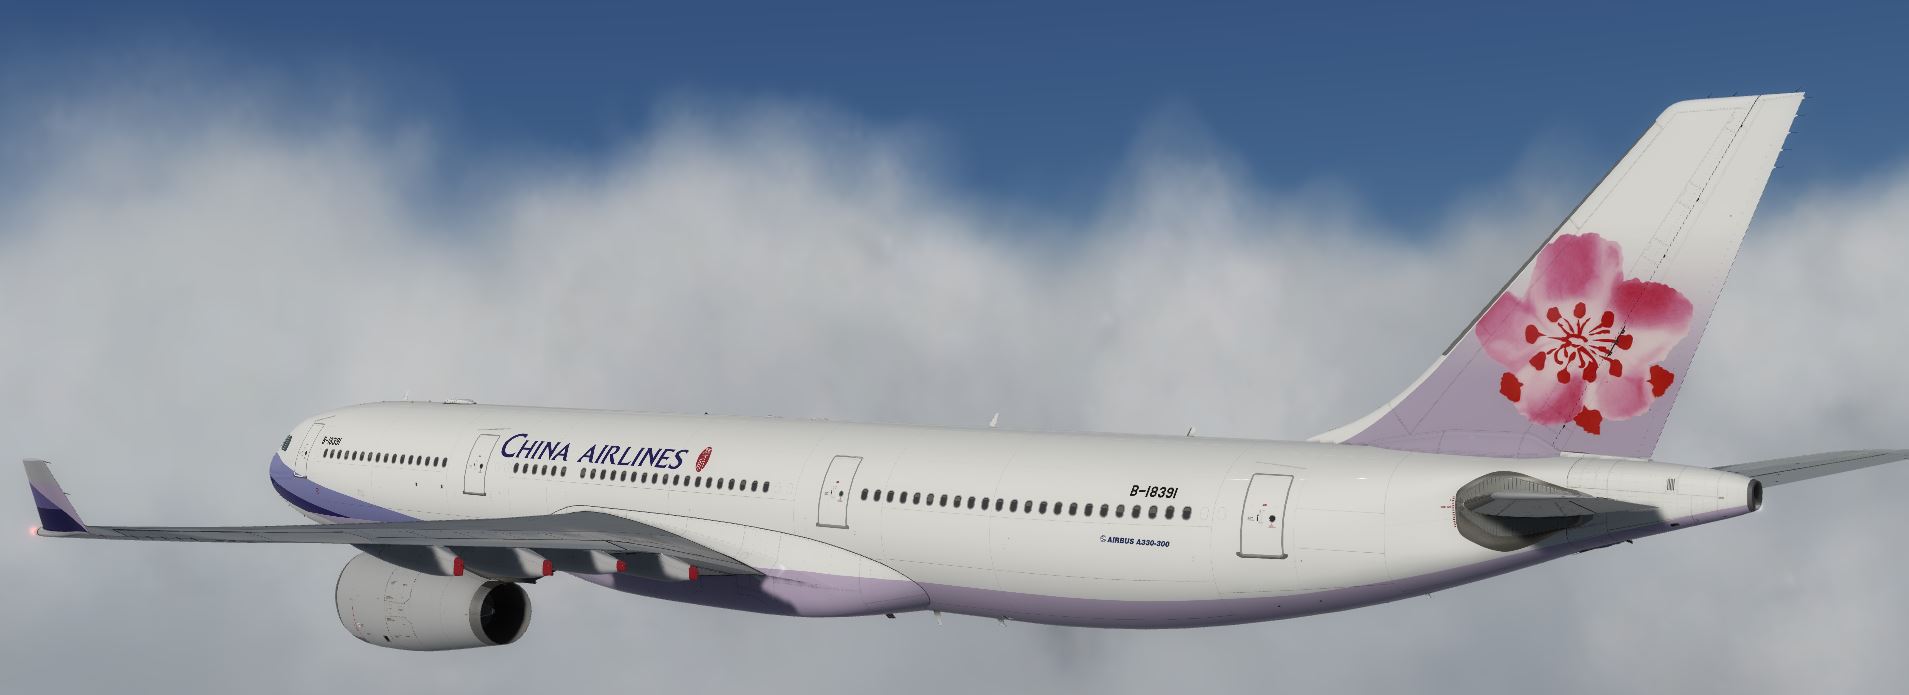 AS A330 ChinaAirline-5199 